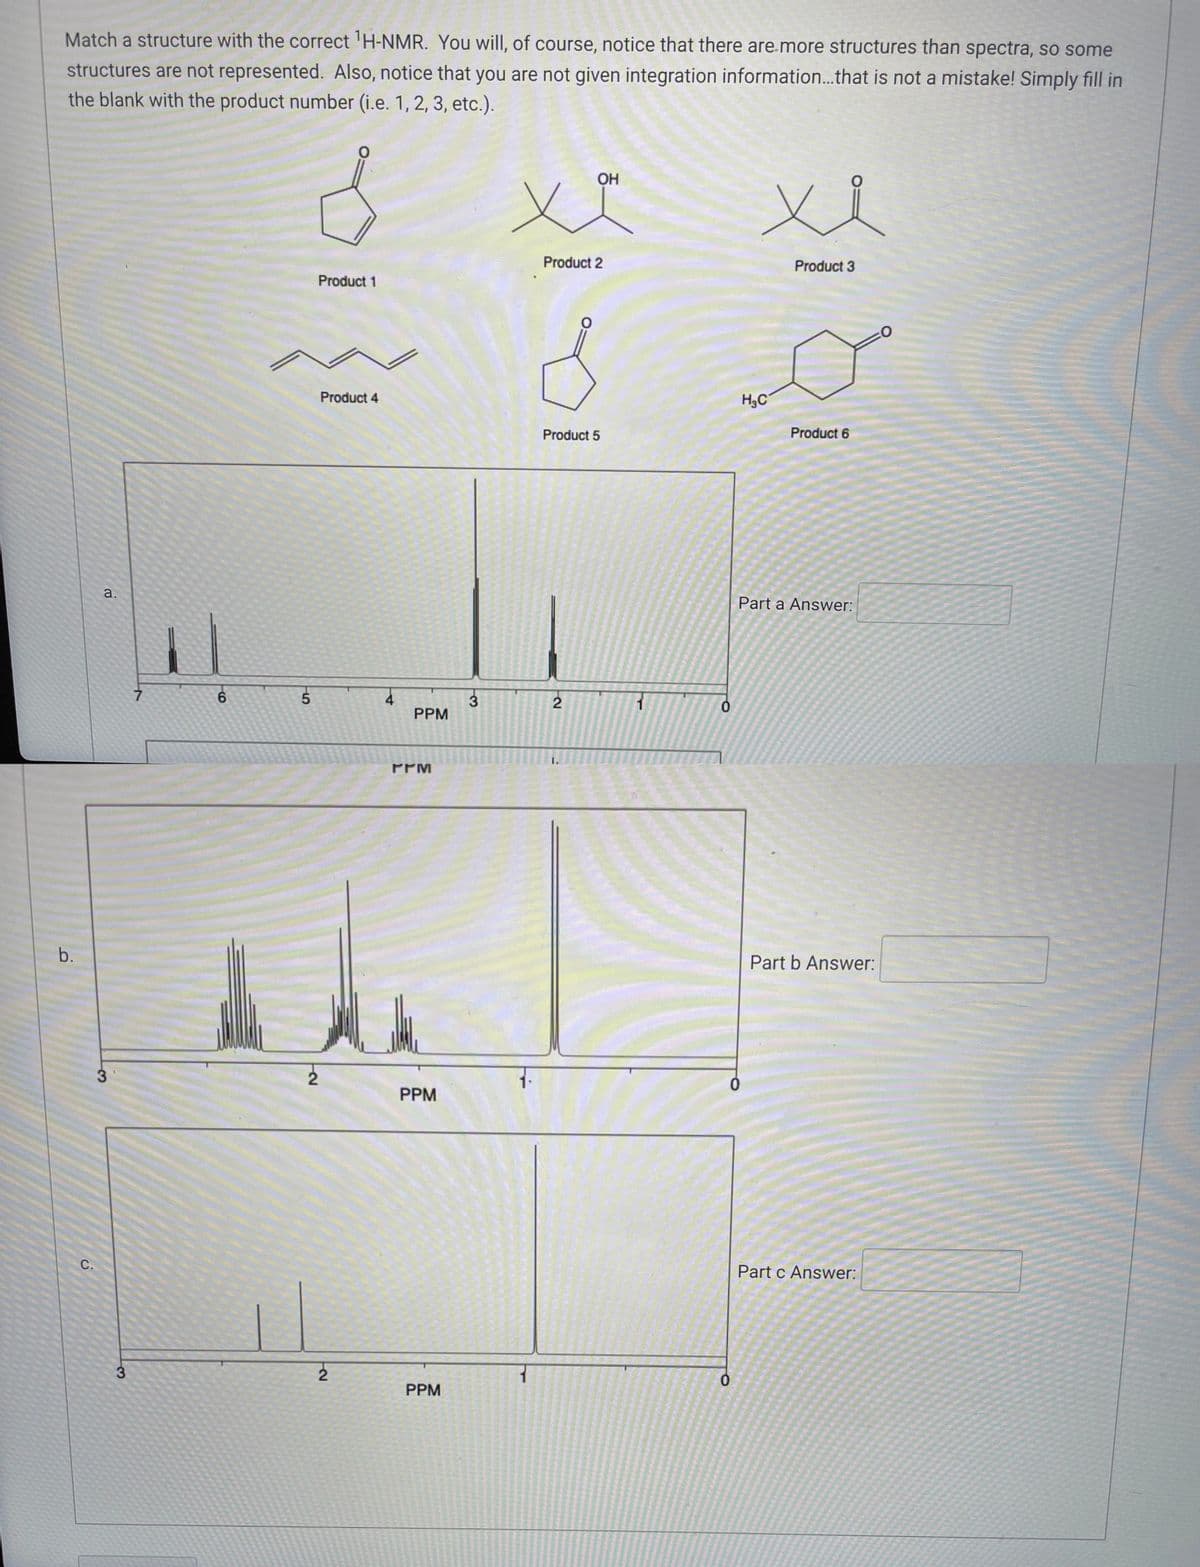 Match a structure with the correct ¹H-NMR. You will, of course, notice that there are more structures than spectra, so some
structures are not represented. Also, notice that you are not given integration information... that is not a mistake! Simply fill in
the blank with the product number (i.e. 1, 2, 3, etc.).
b.
C.
a.
3
3
7
6
O
8
5
Product 1
2
Product 4
2
PPM
ΓΥΜ
PPM
PPM
3
OH
ха
Product 2
O
Product 5
2
1
0
0
xi
H₂C
Product 3
Product 6
Part a Answer:
Part b Answer:
Part c Answer: